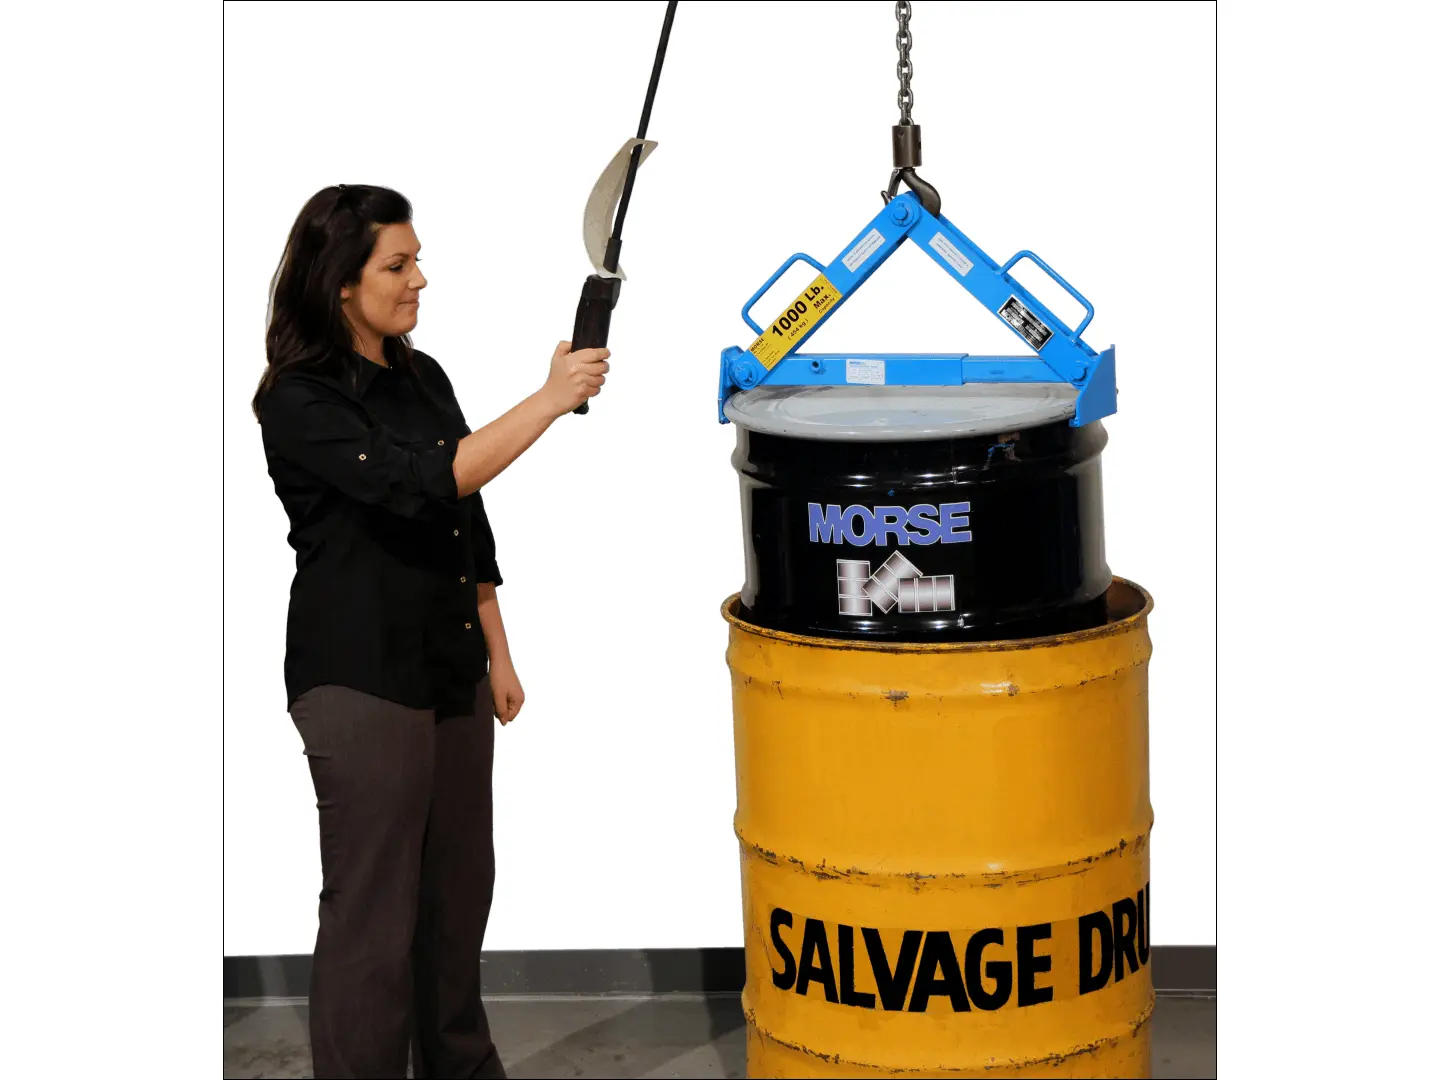 Place a 55-gallon (210 liter) drum into a salvage drum